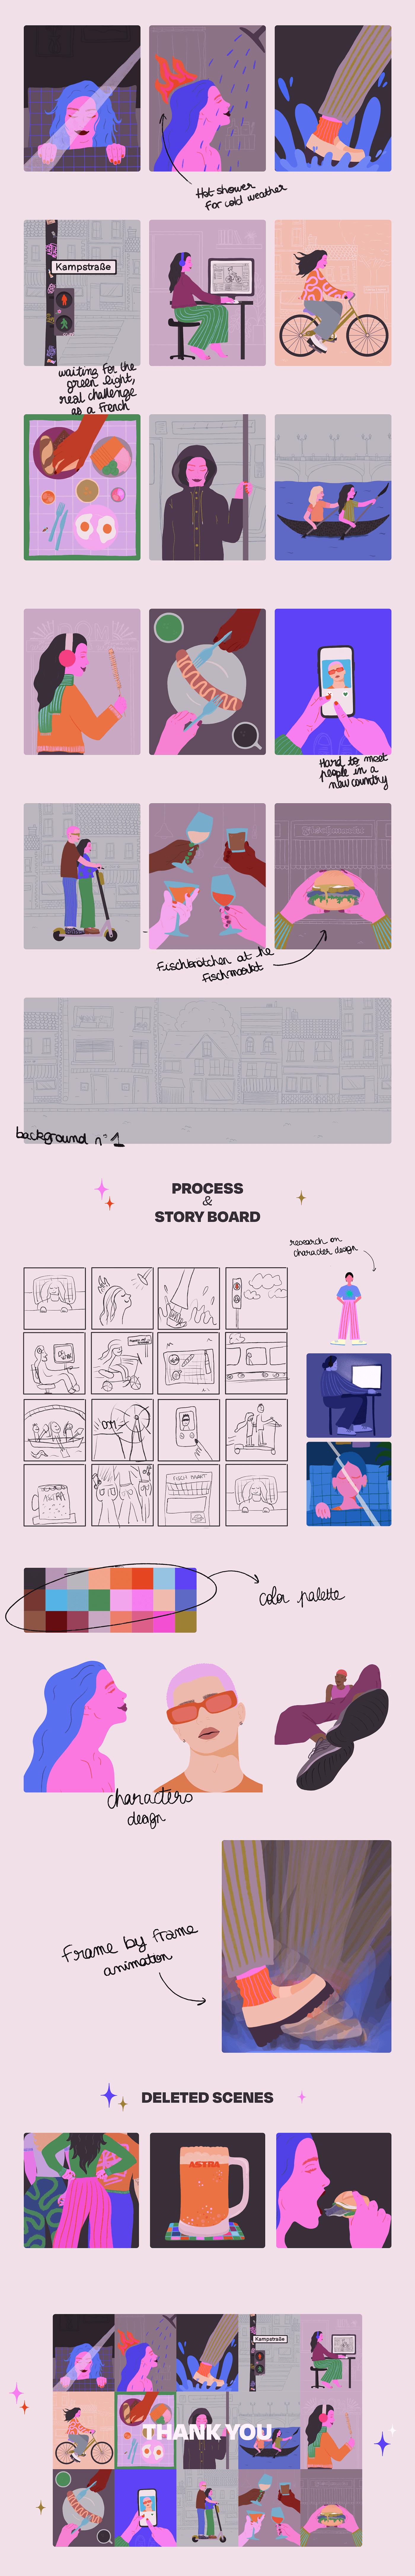 Process of creation, story board, motion design, color palette, caracter design and deleted scenes.
